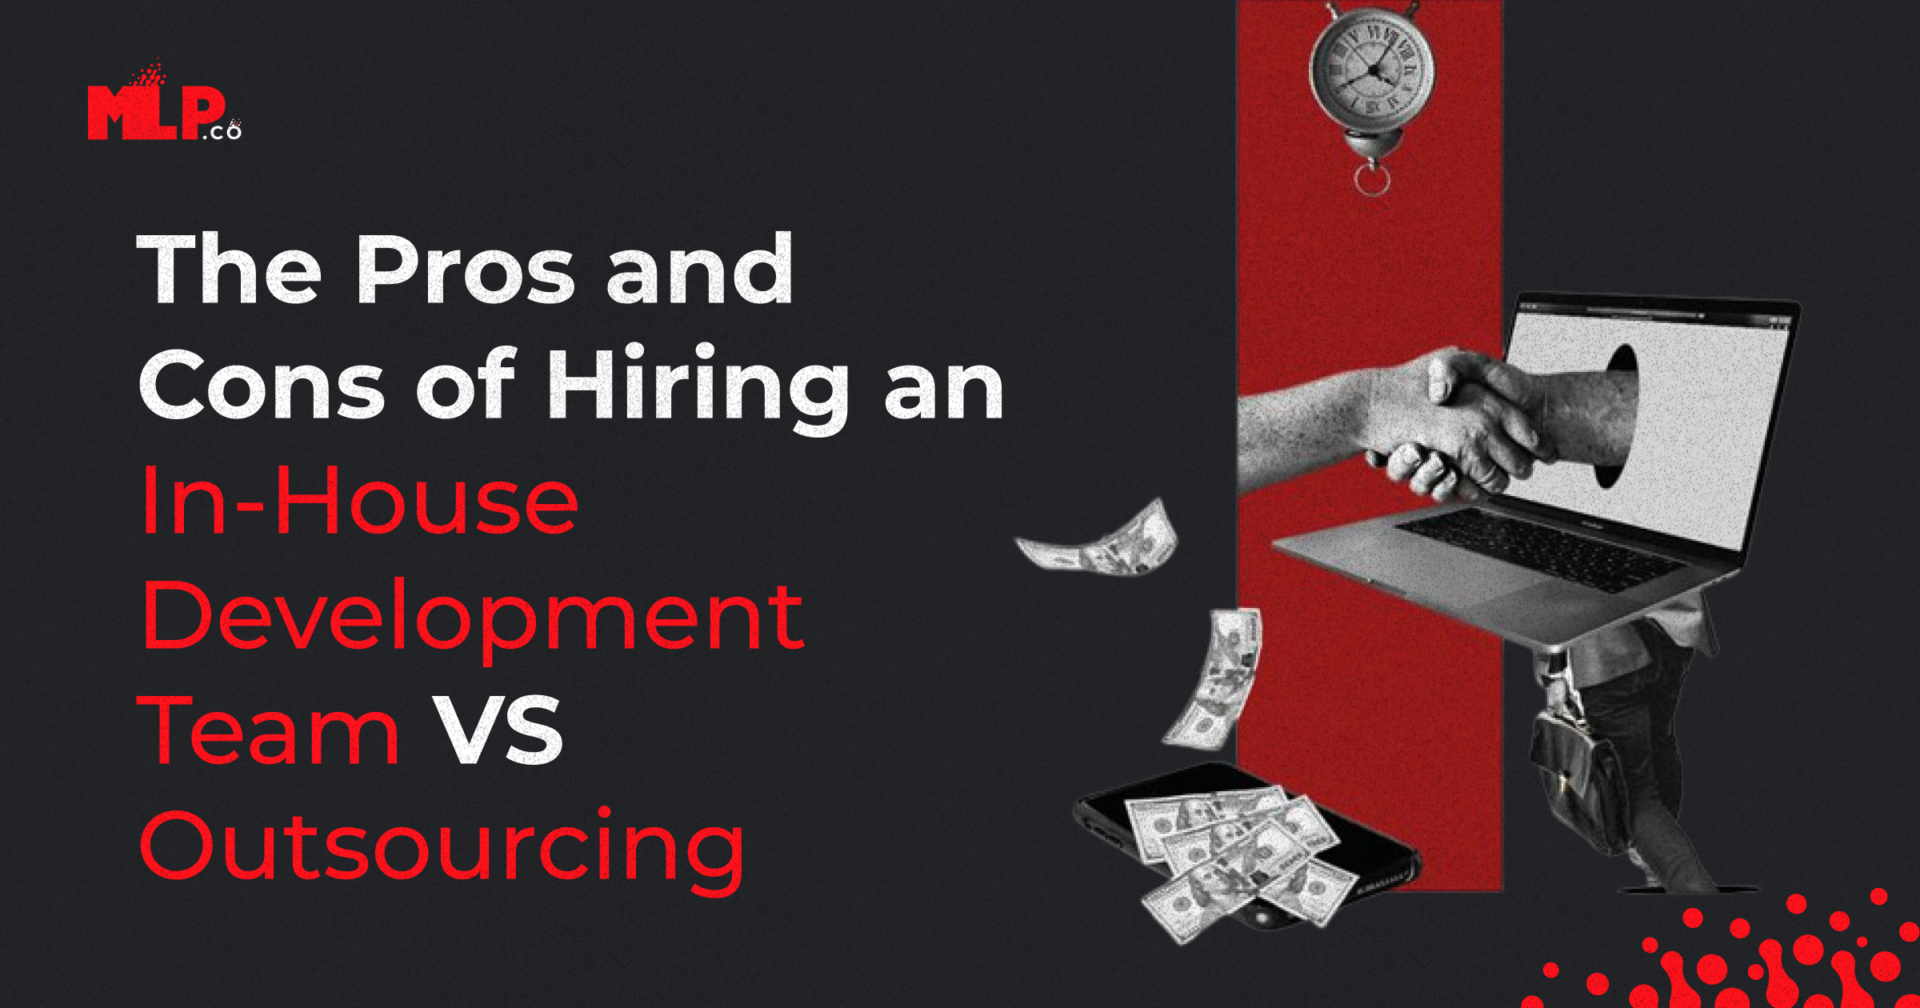 The Pros and Cons of Hiring an In-House Development Team vs Outsourcing